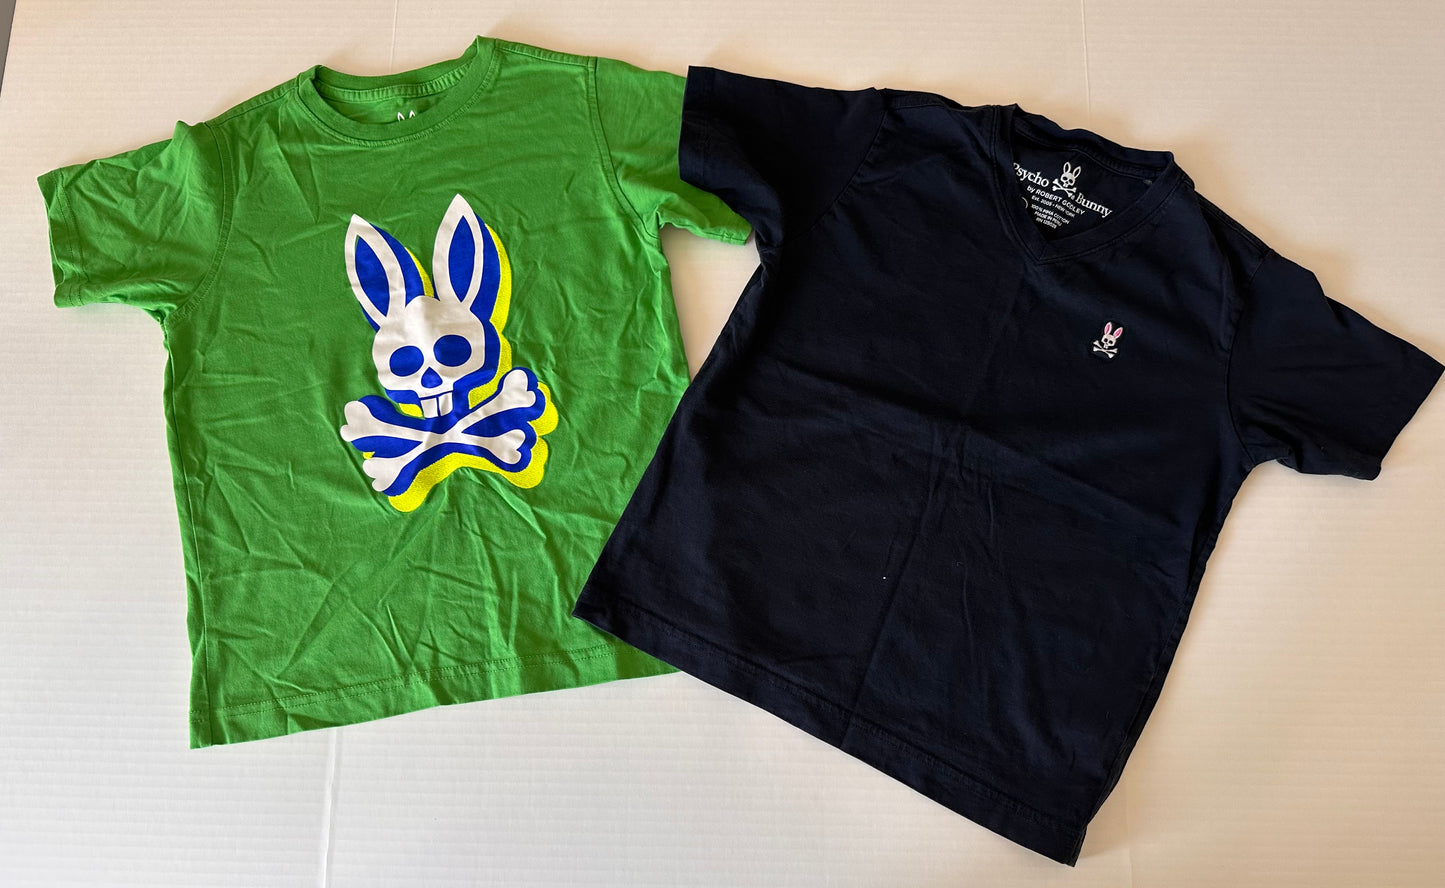 Pyscho Bunny youth boys size M 10-12 t shirts